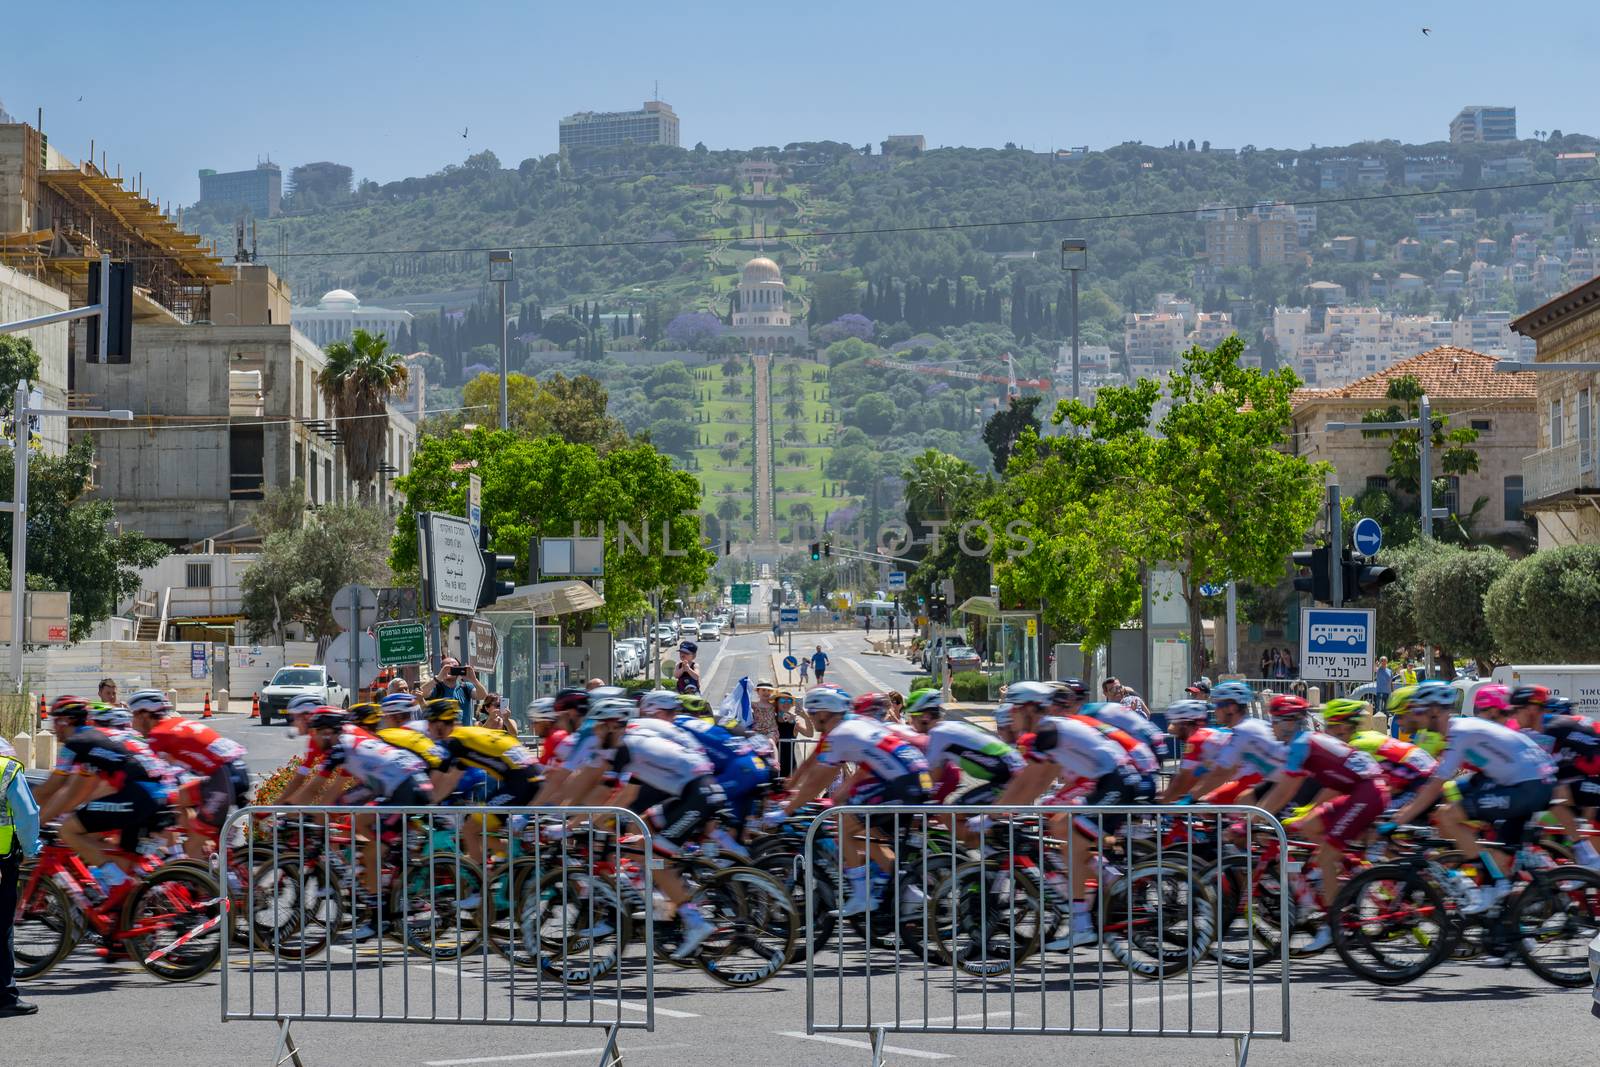 HAIFA, ISRAEL - MAY 05, 2018: Scene of stage 2 of 2018 Giro d Italia, with cyclists and spectators, and the German Colony, Bahai gardens and shrine in the background. Haifa, Israel